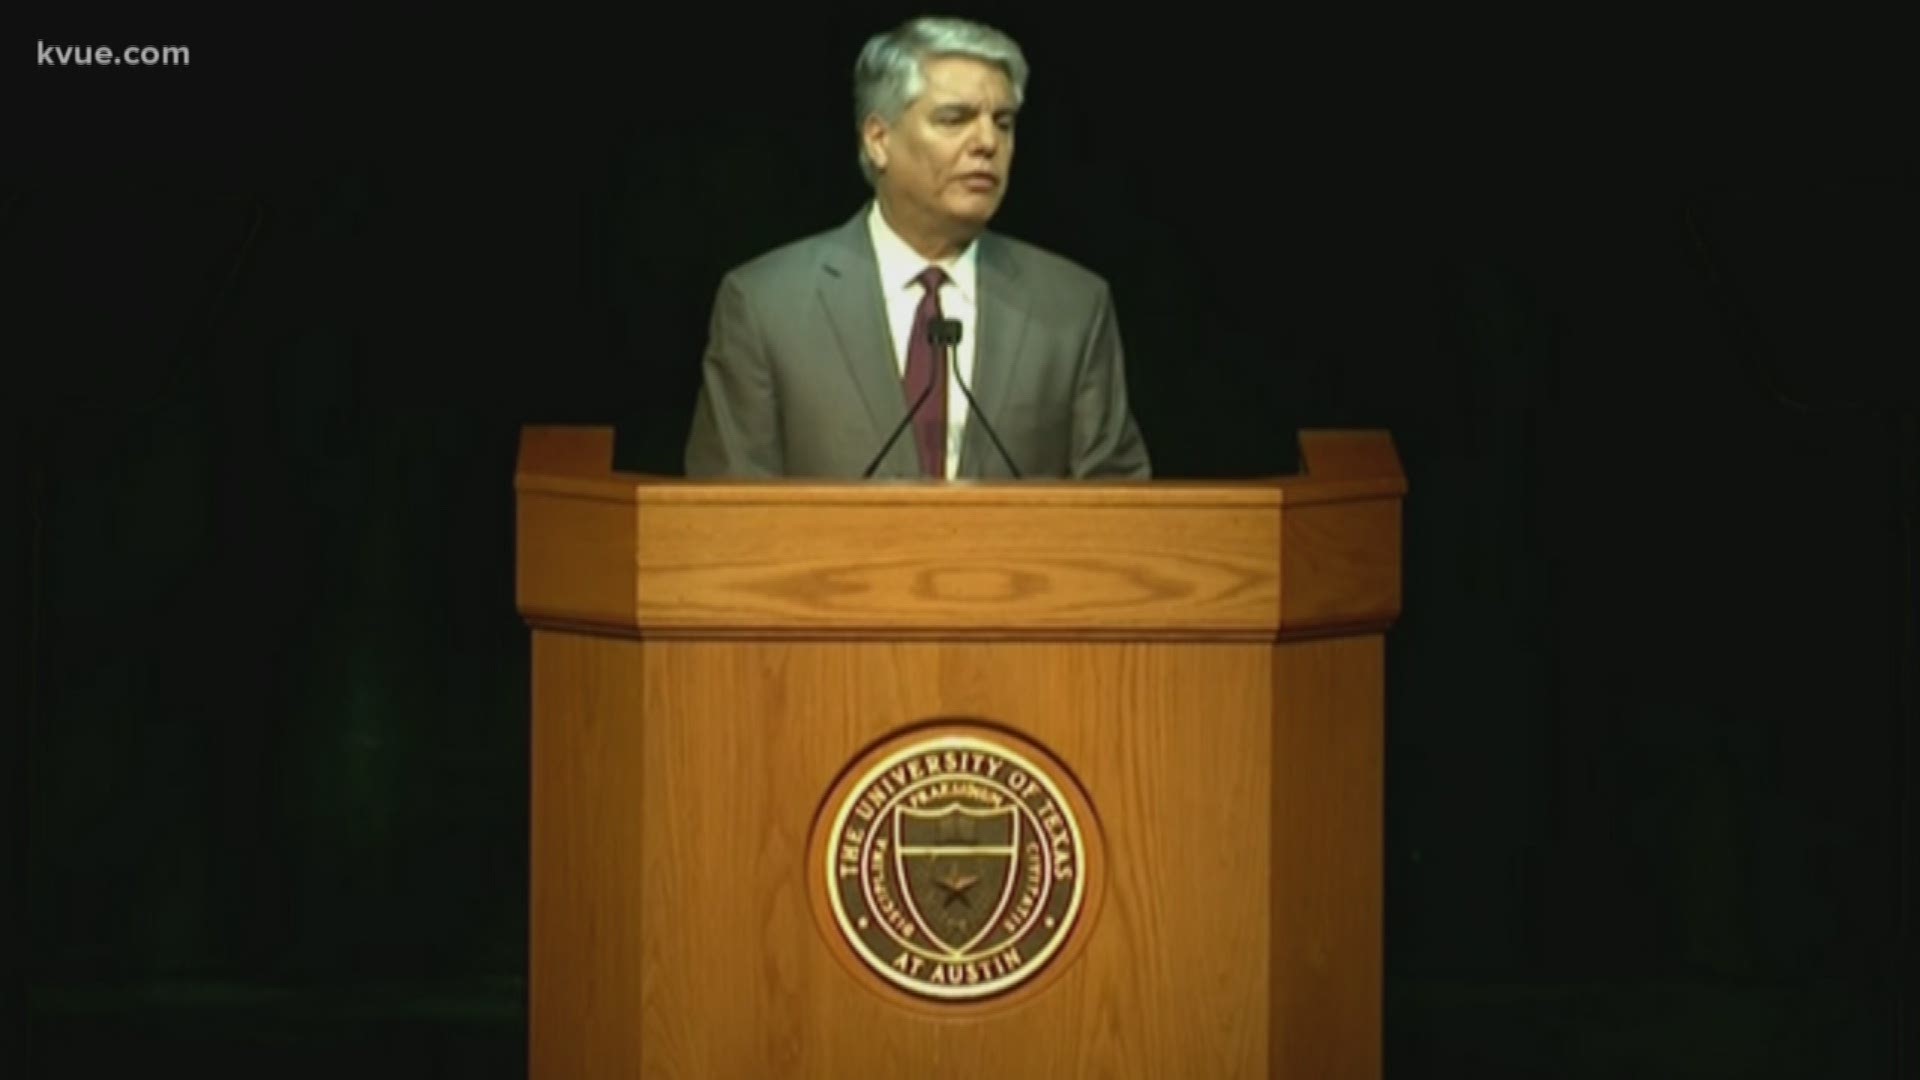 University of Texas President Gregory L. Fenves talked about his priorities for the school in the annual address.